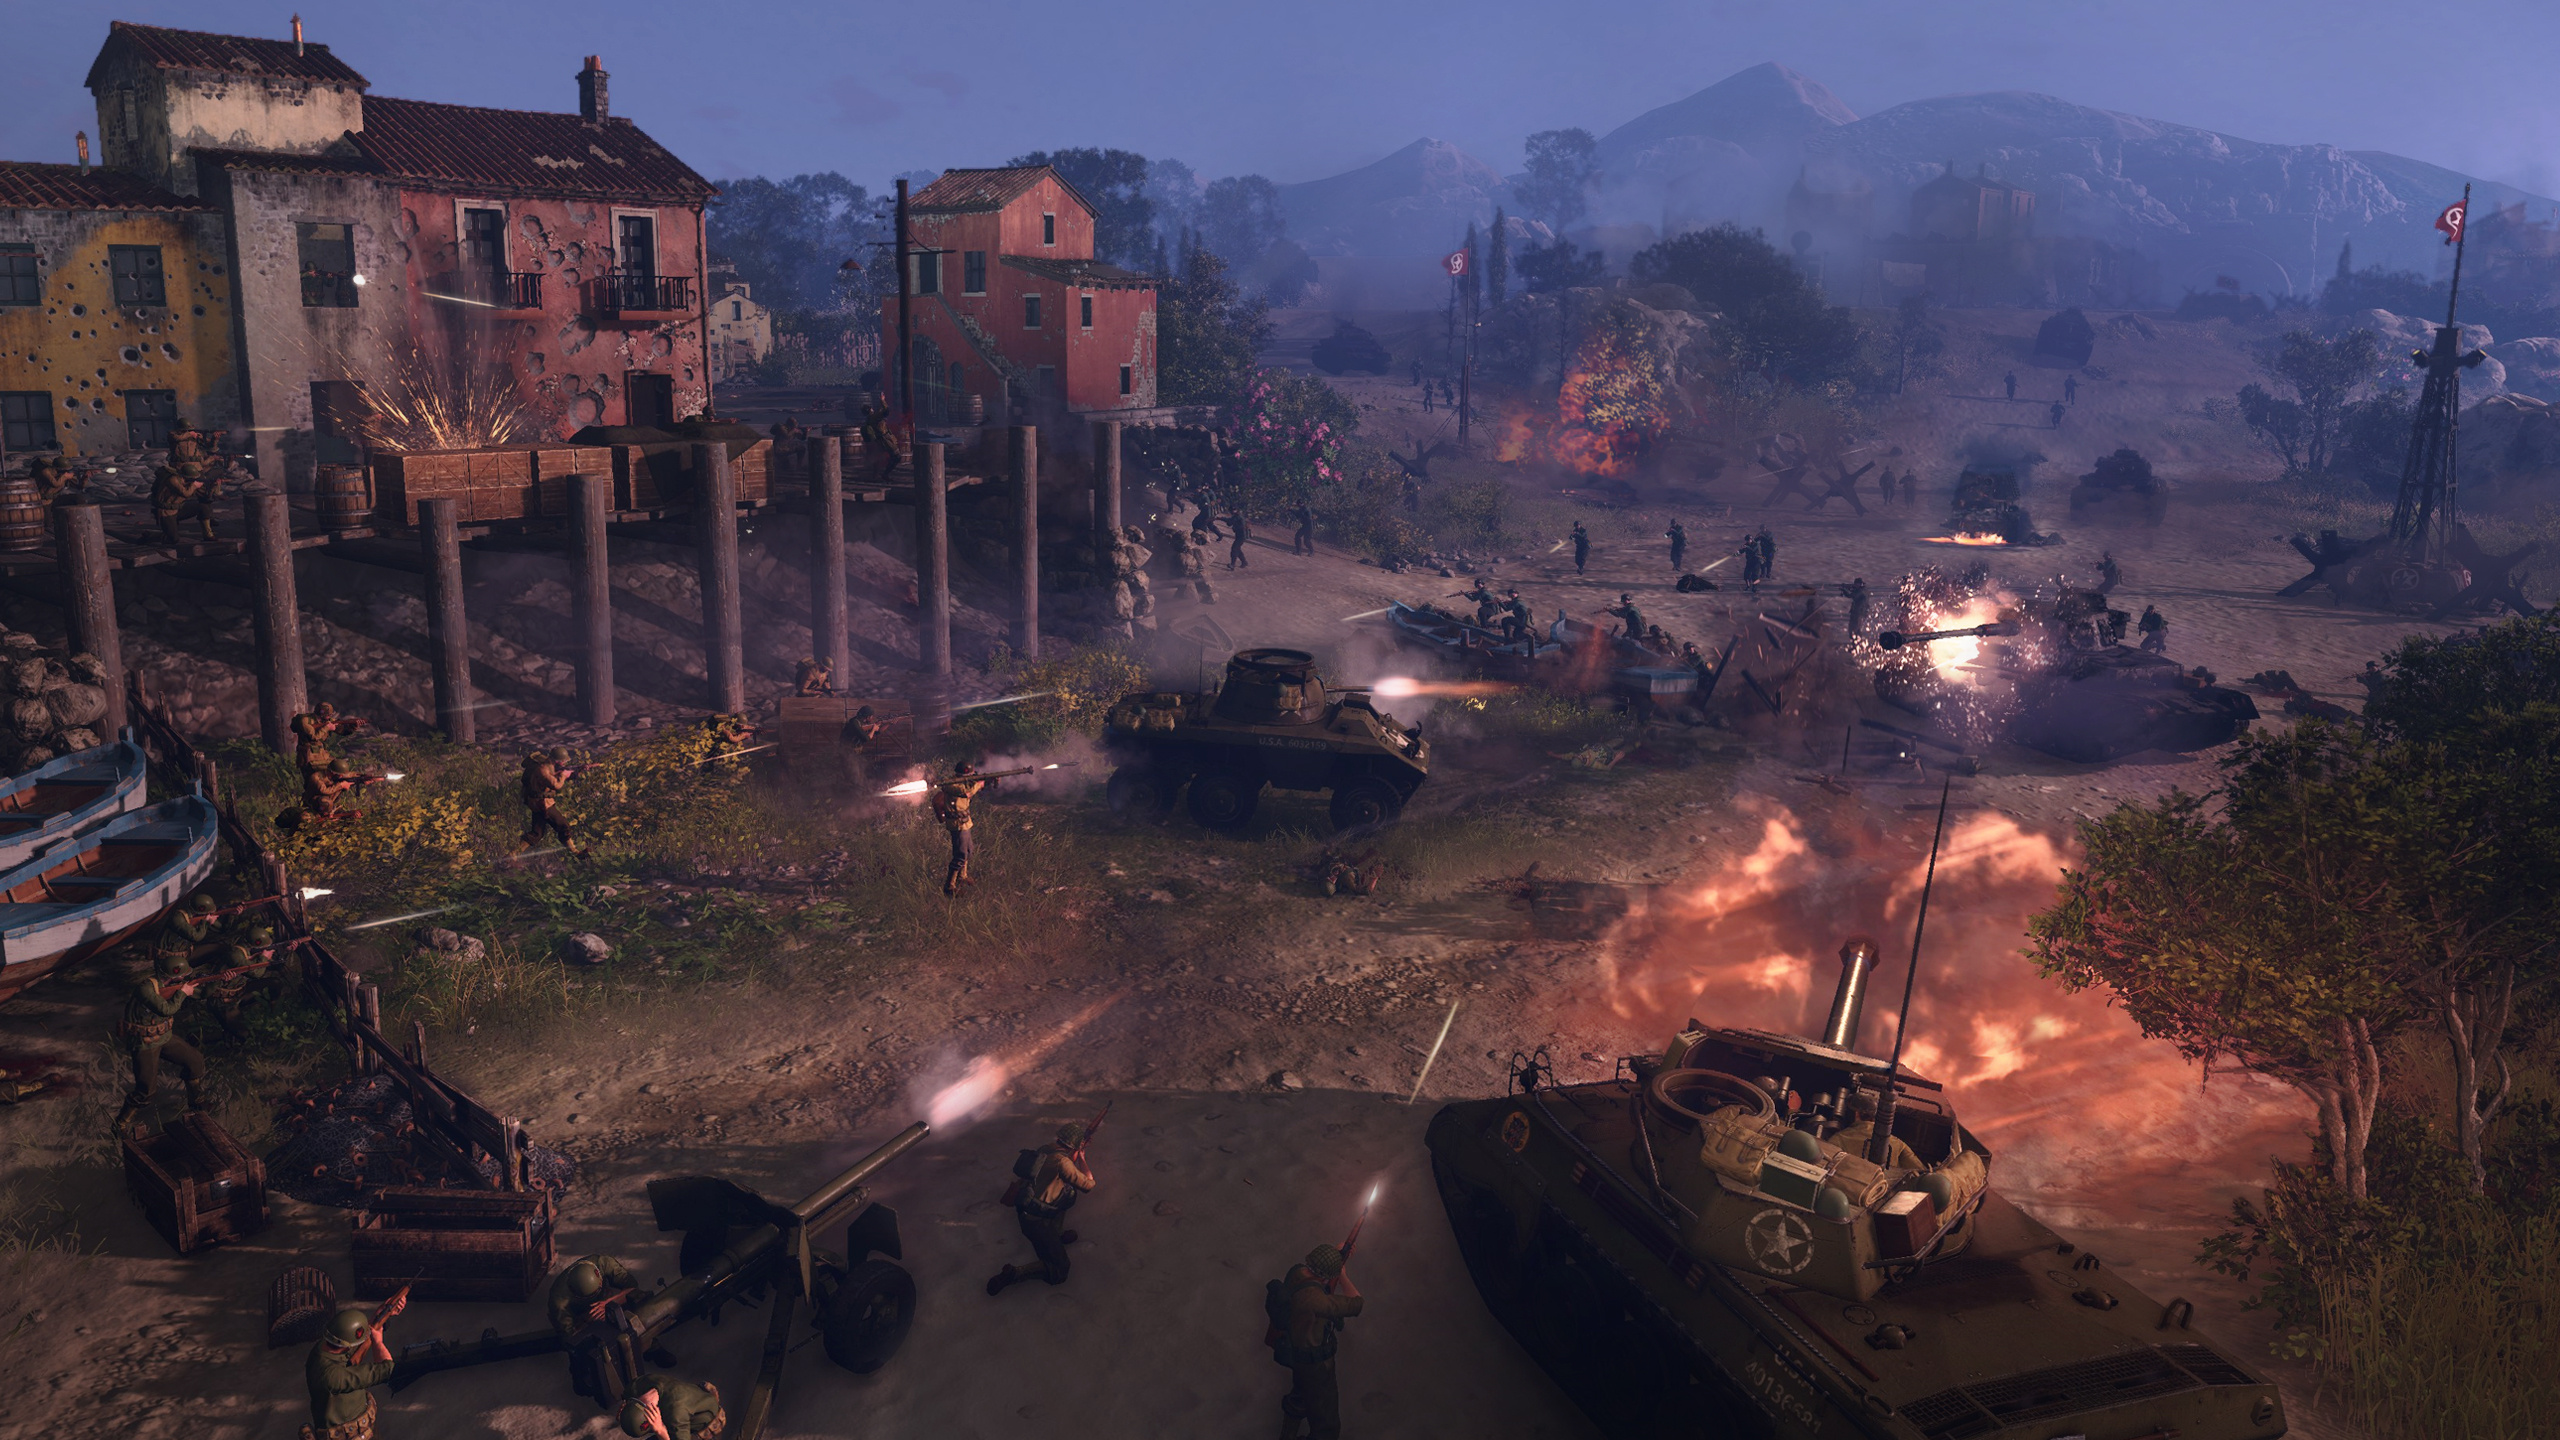 Company of Heroes 3: Armor profiles of vehicles in the game has been updated to now include side armor. 2560x1440 HD Background.